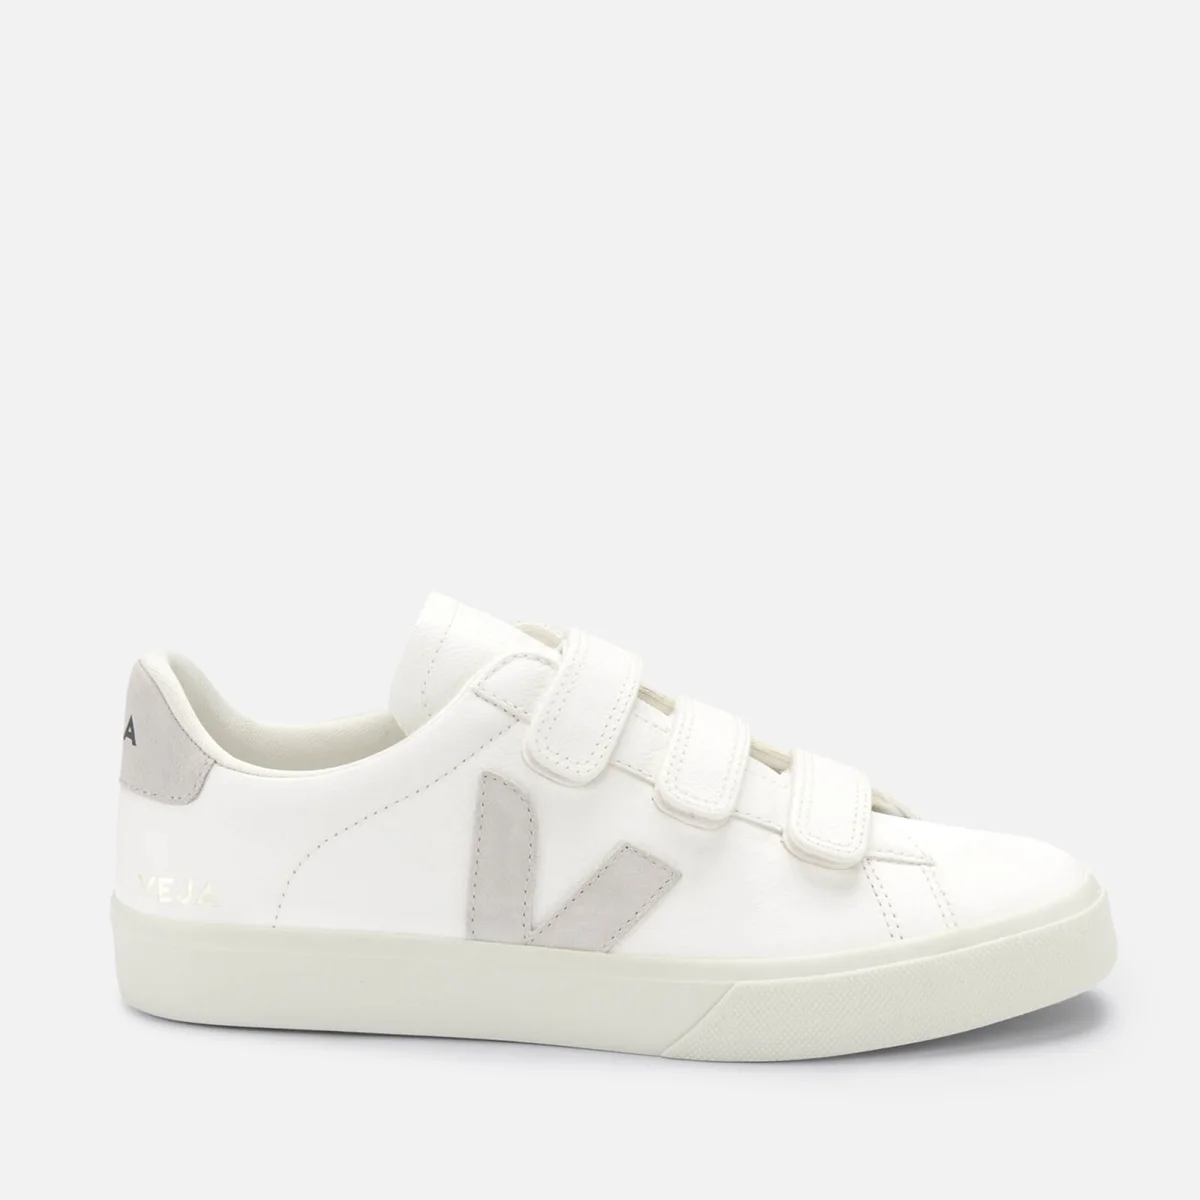 Veja Recife Chrome-Free Leather Trainers Image 1